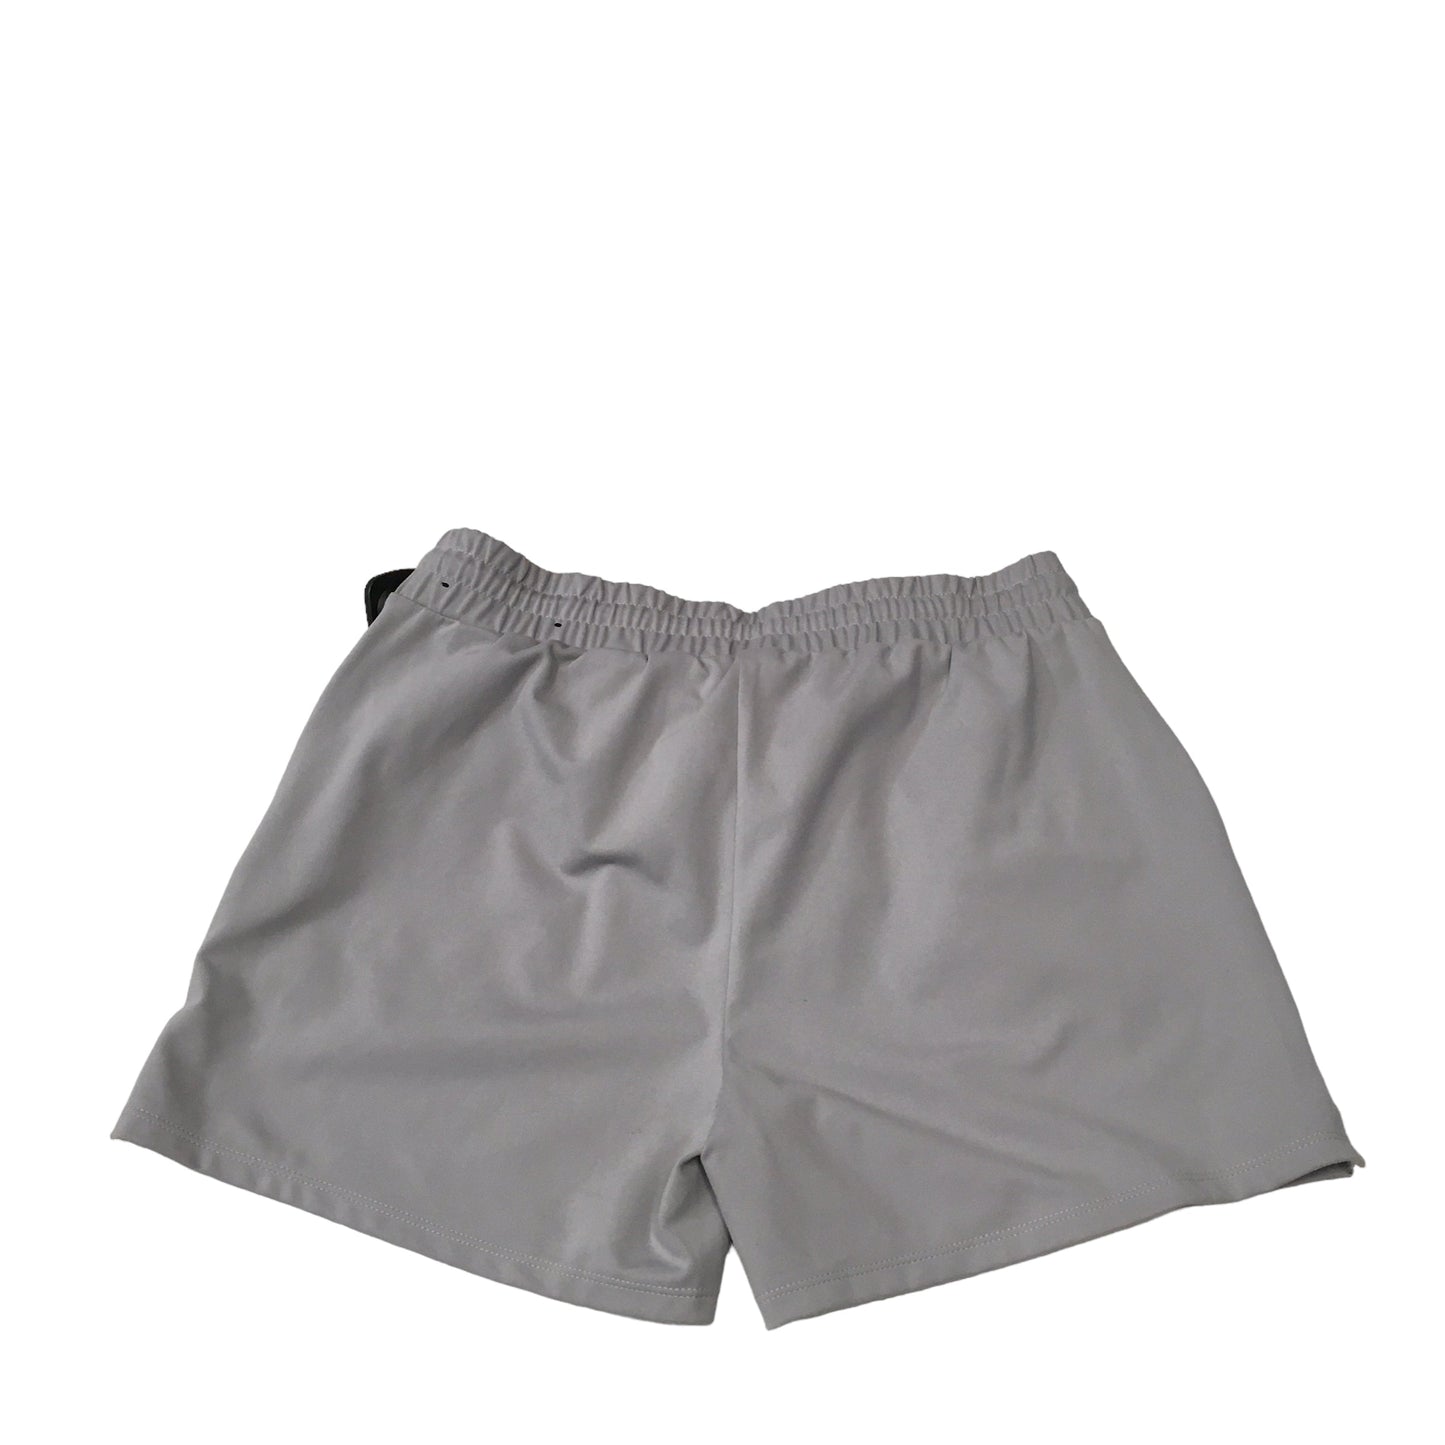 Athletic Shorts By Cynthia Rowley  Size: S